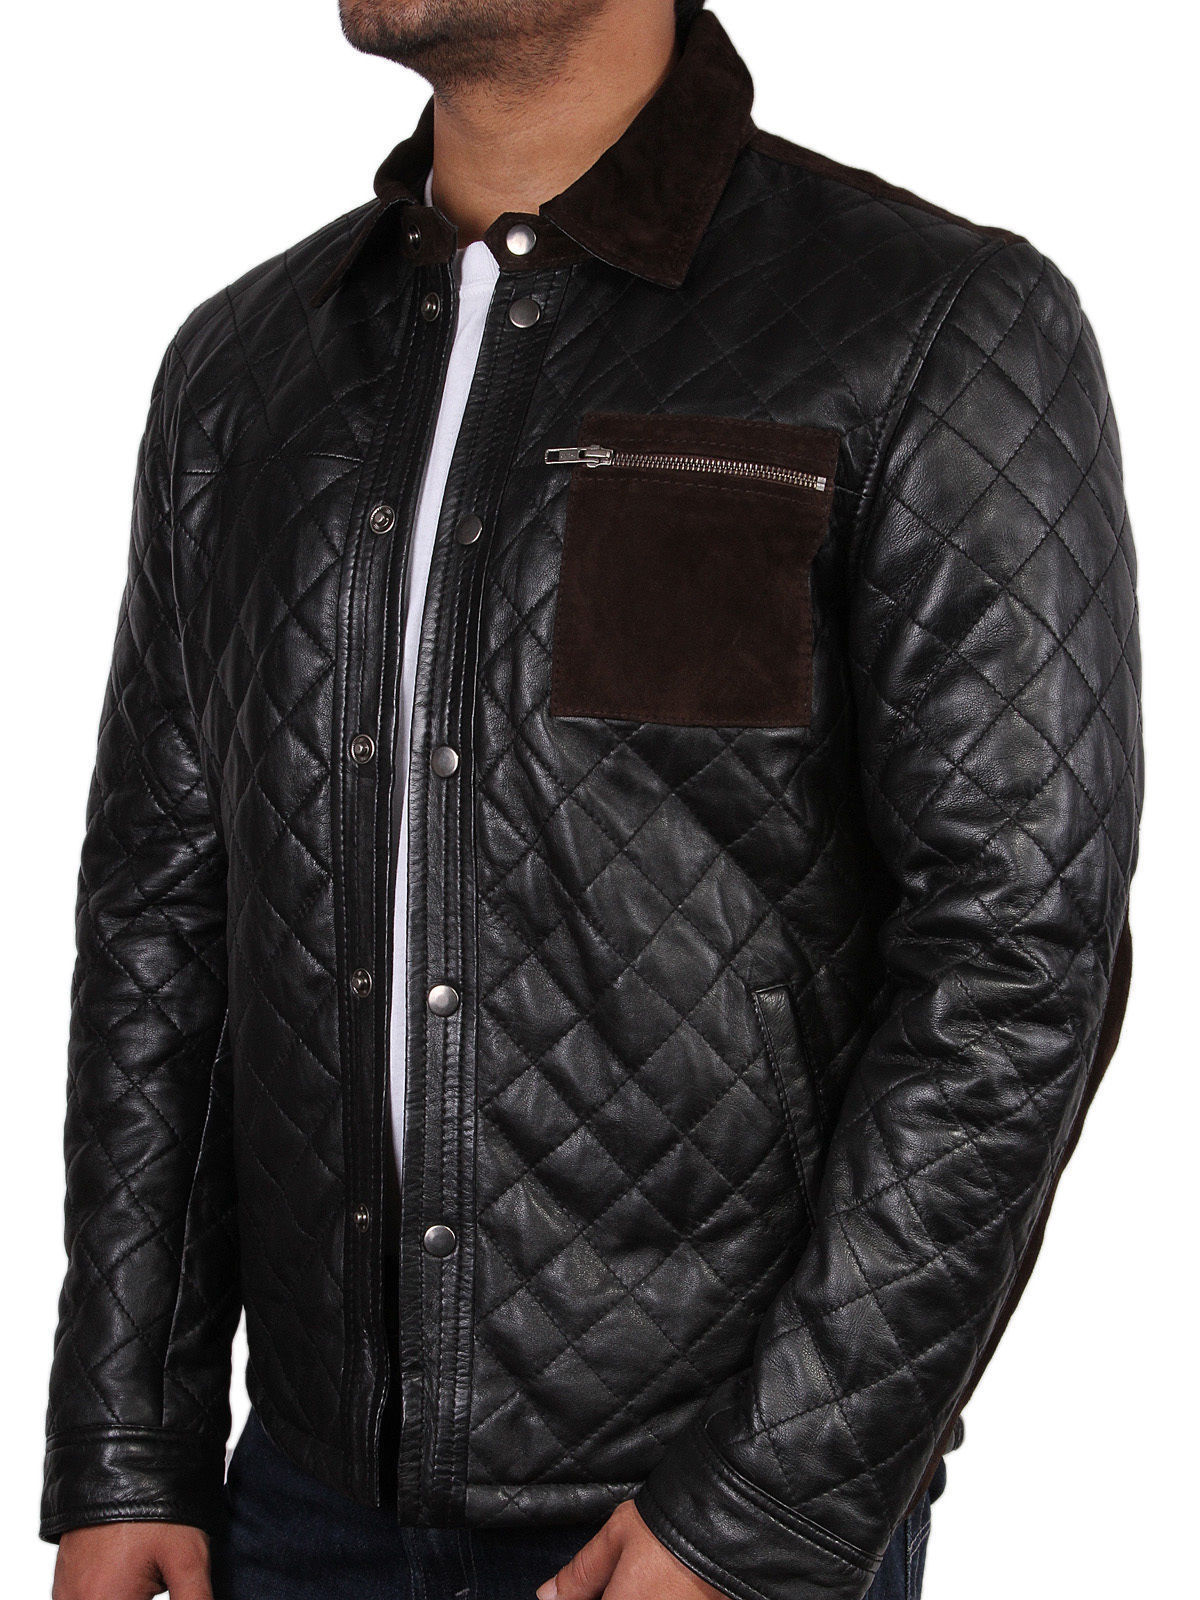 New Mens Quilted Leather Jacket, New Men Quilted Motorcycle Jacket ...